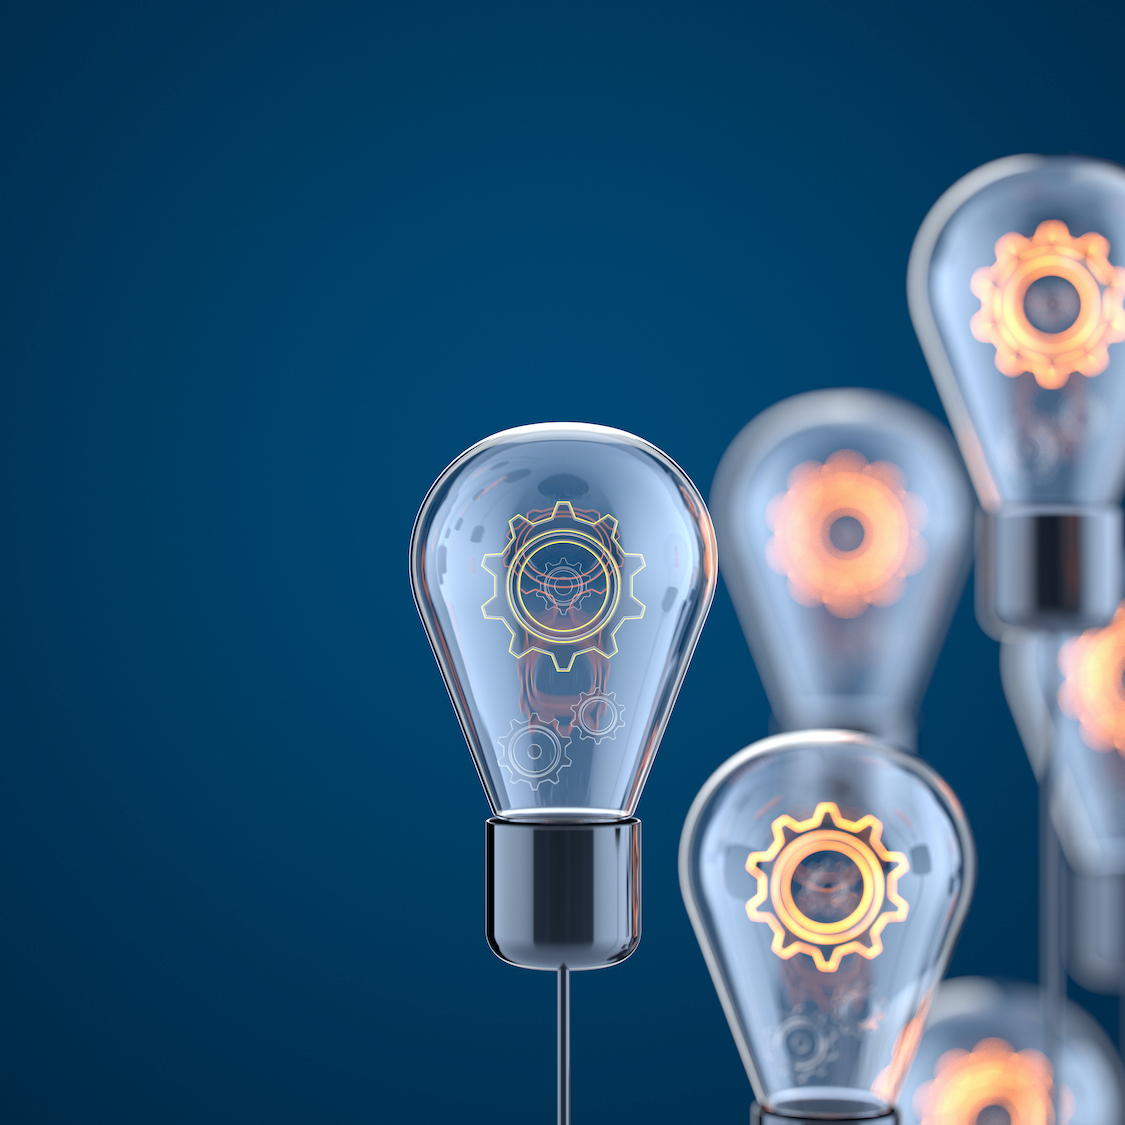 Light bulbs representing modern technology and data - square